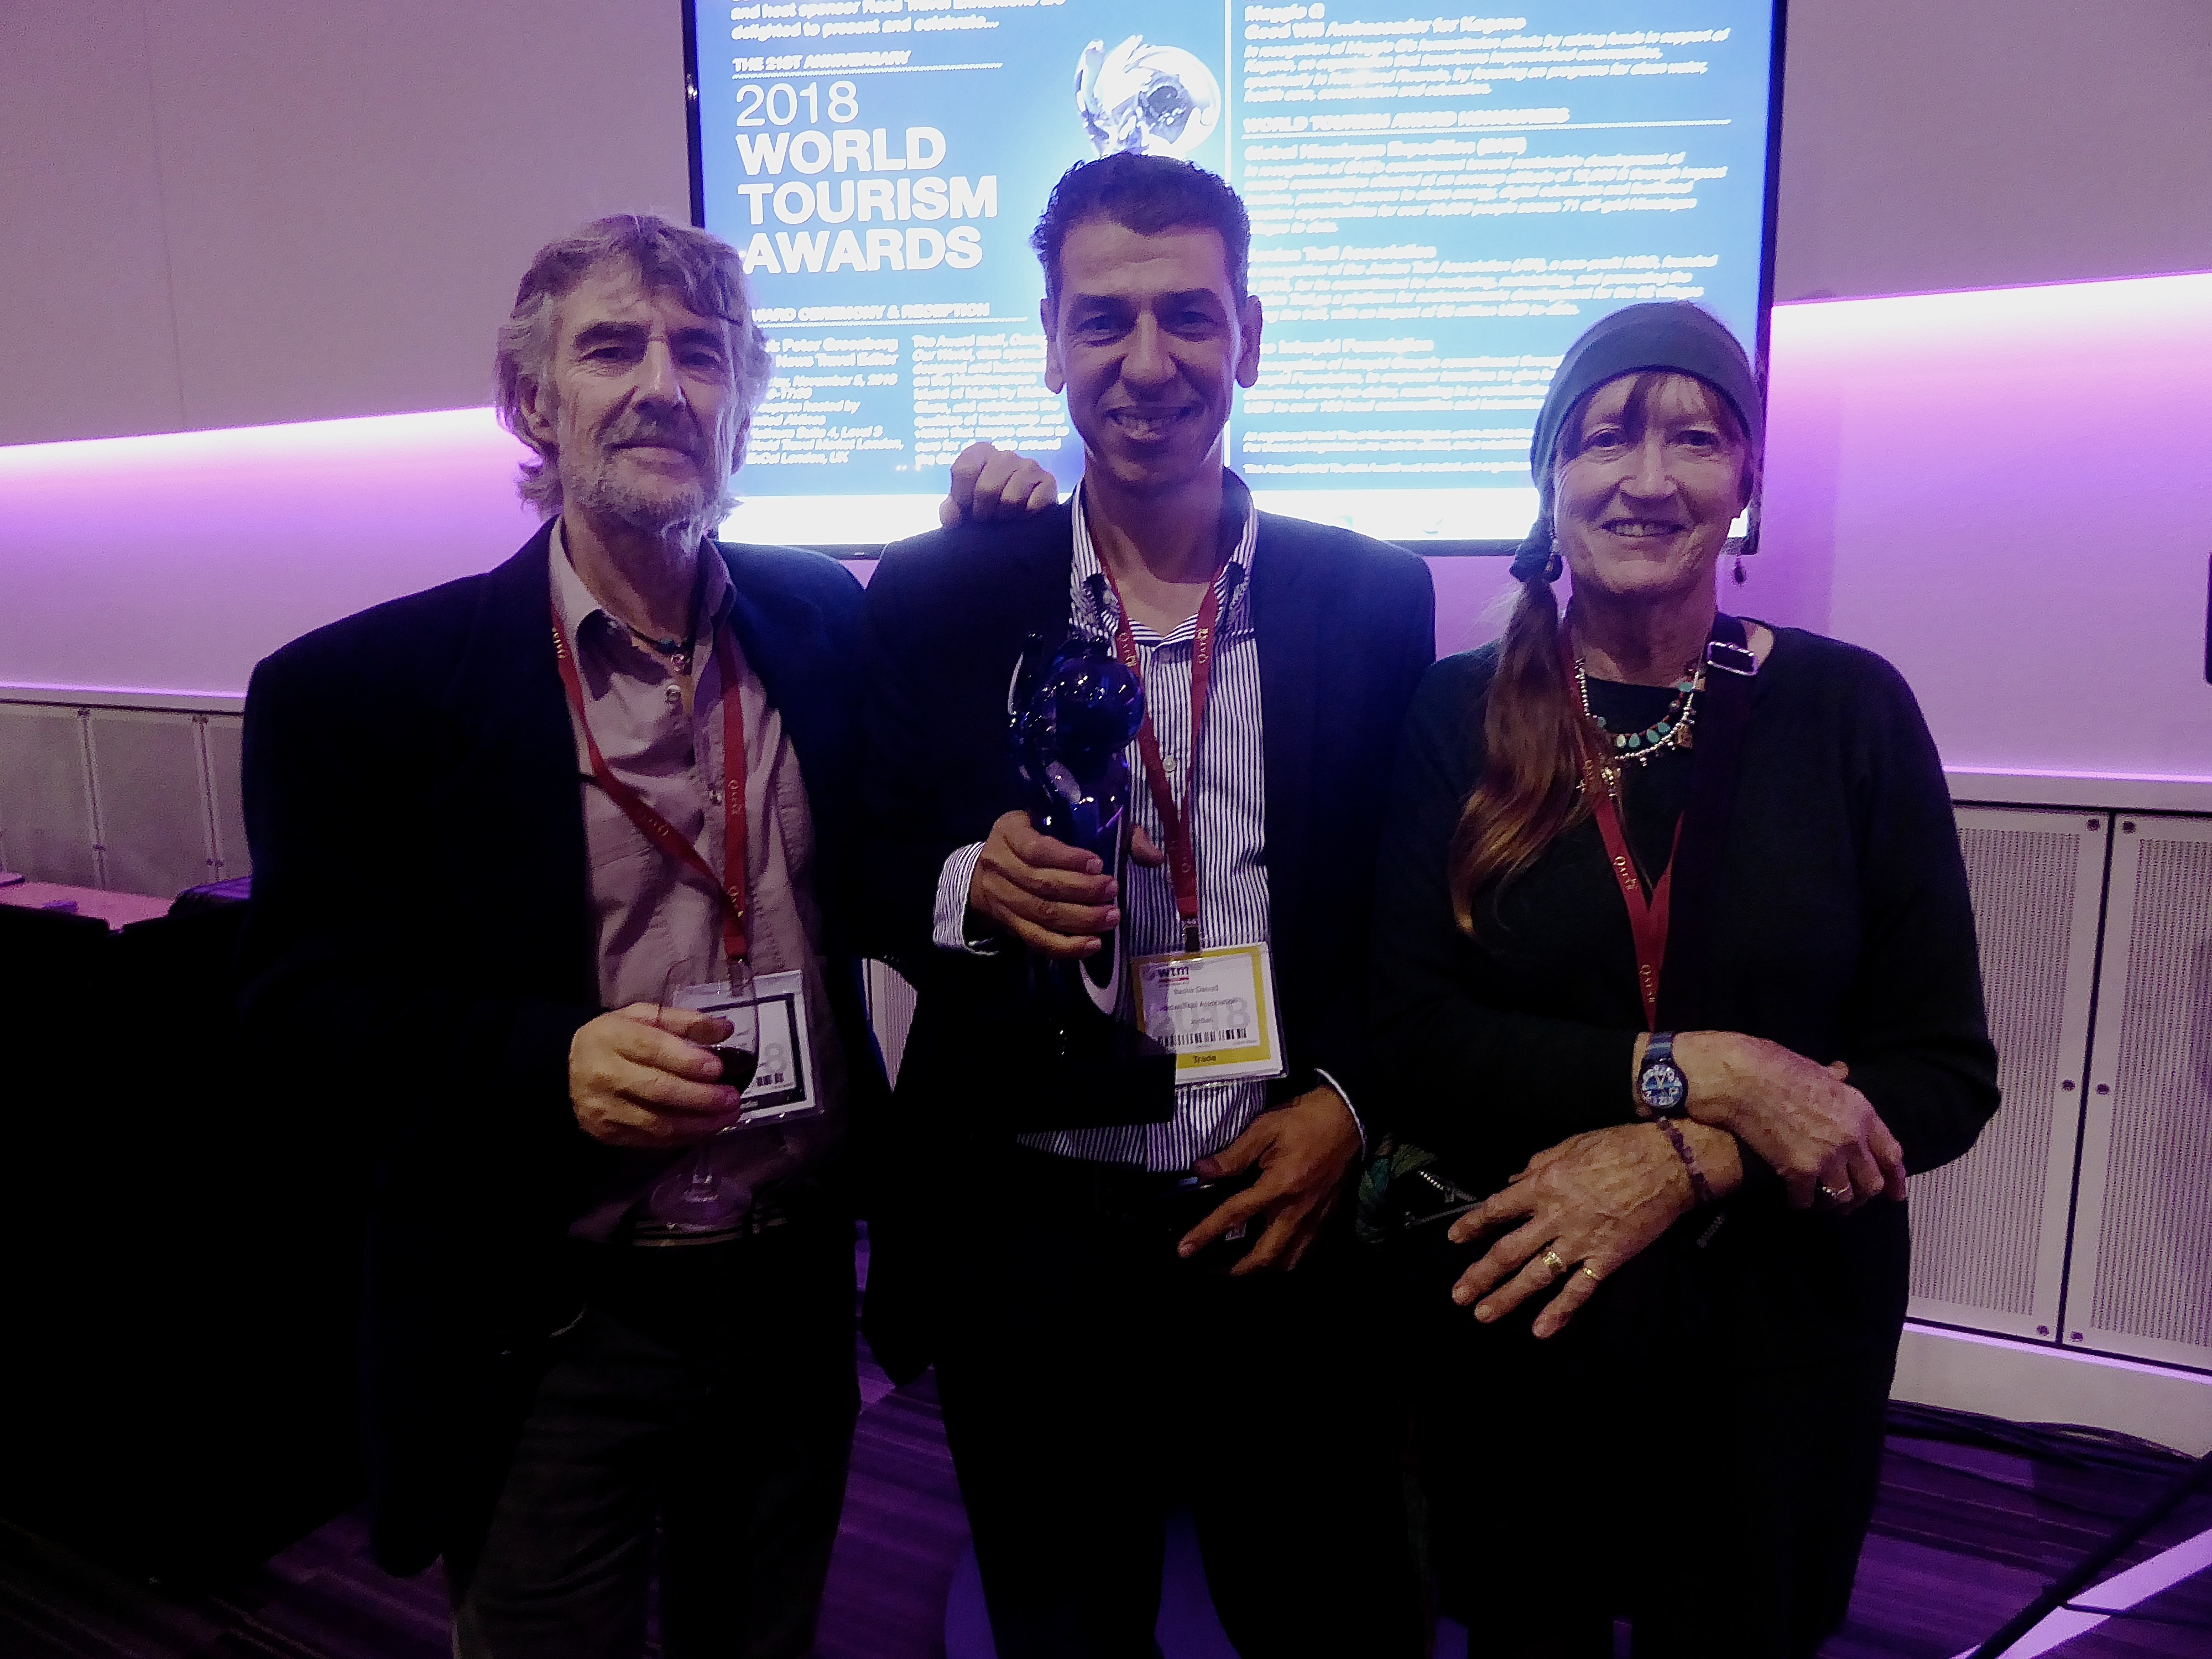 Bashir Daoud, CEO Jordan Trail Association (centre), with Tony and Di after the presentation of the World Tourism Award at this years World Travel Show in London.